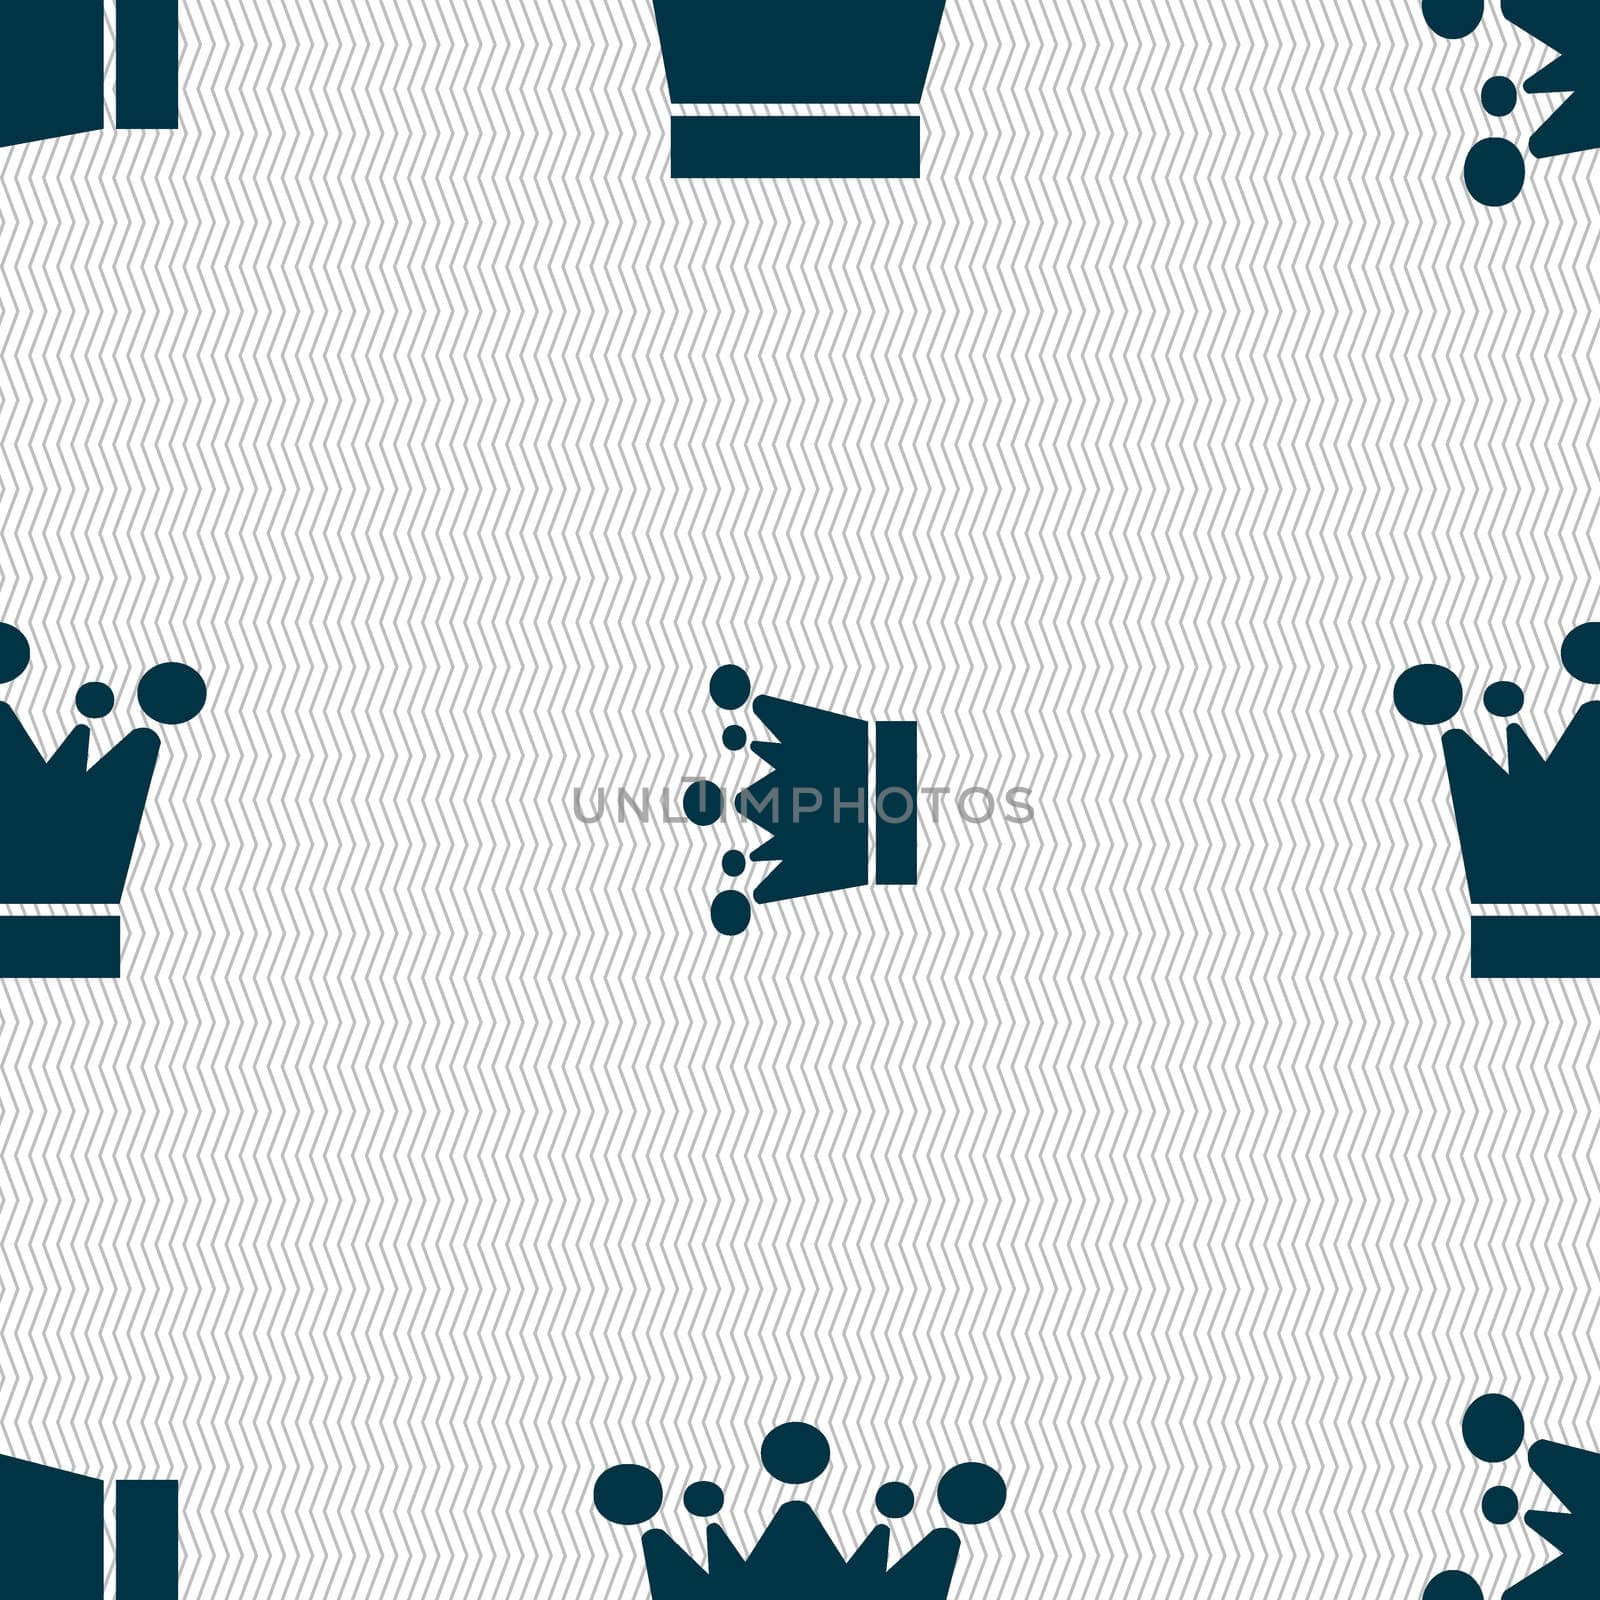 Crown icon sign. Seamless abstract background with geometric shapes. illustration